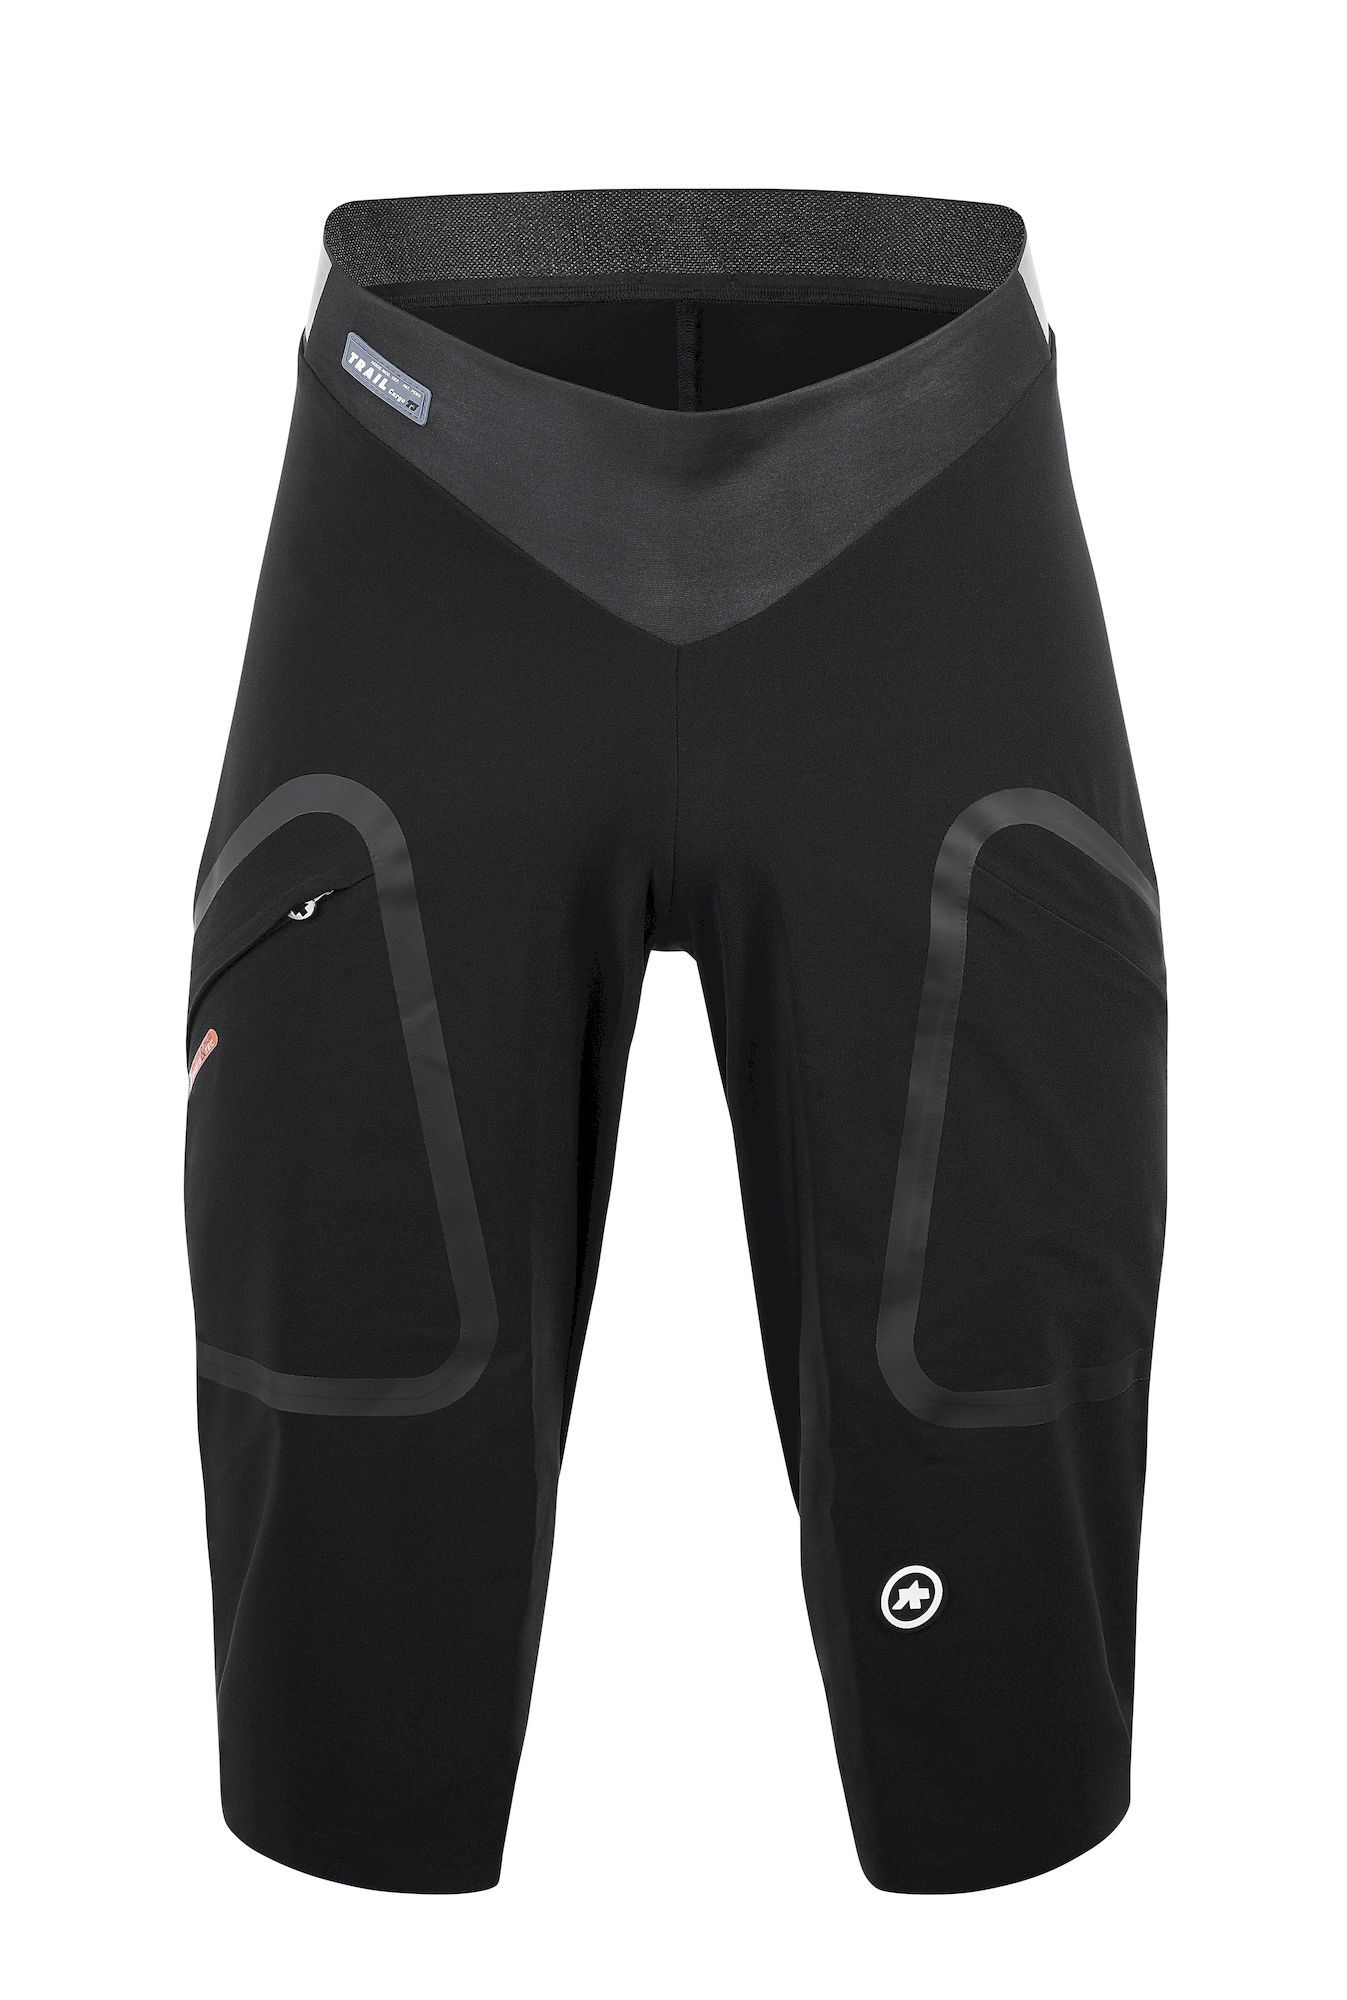 Assos Trail Tactica Cargo Knickers T3 - Cycling trousers - Men's | Hardloop